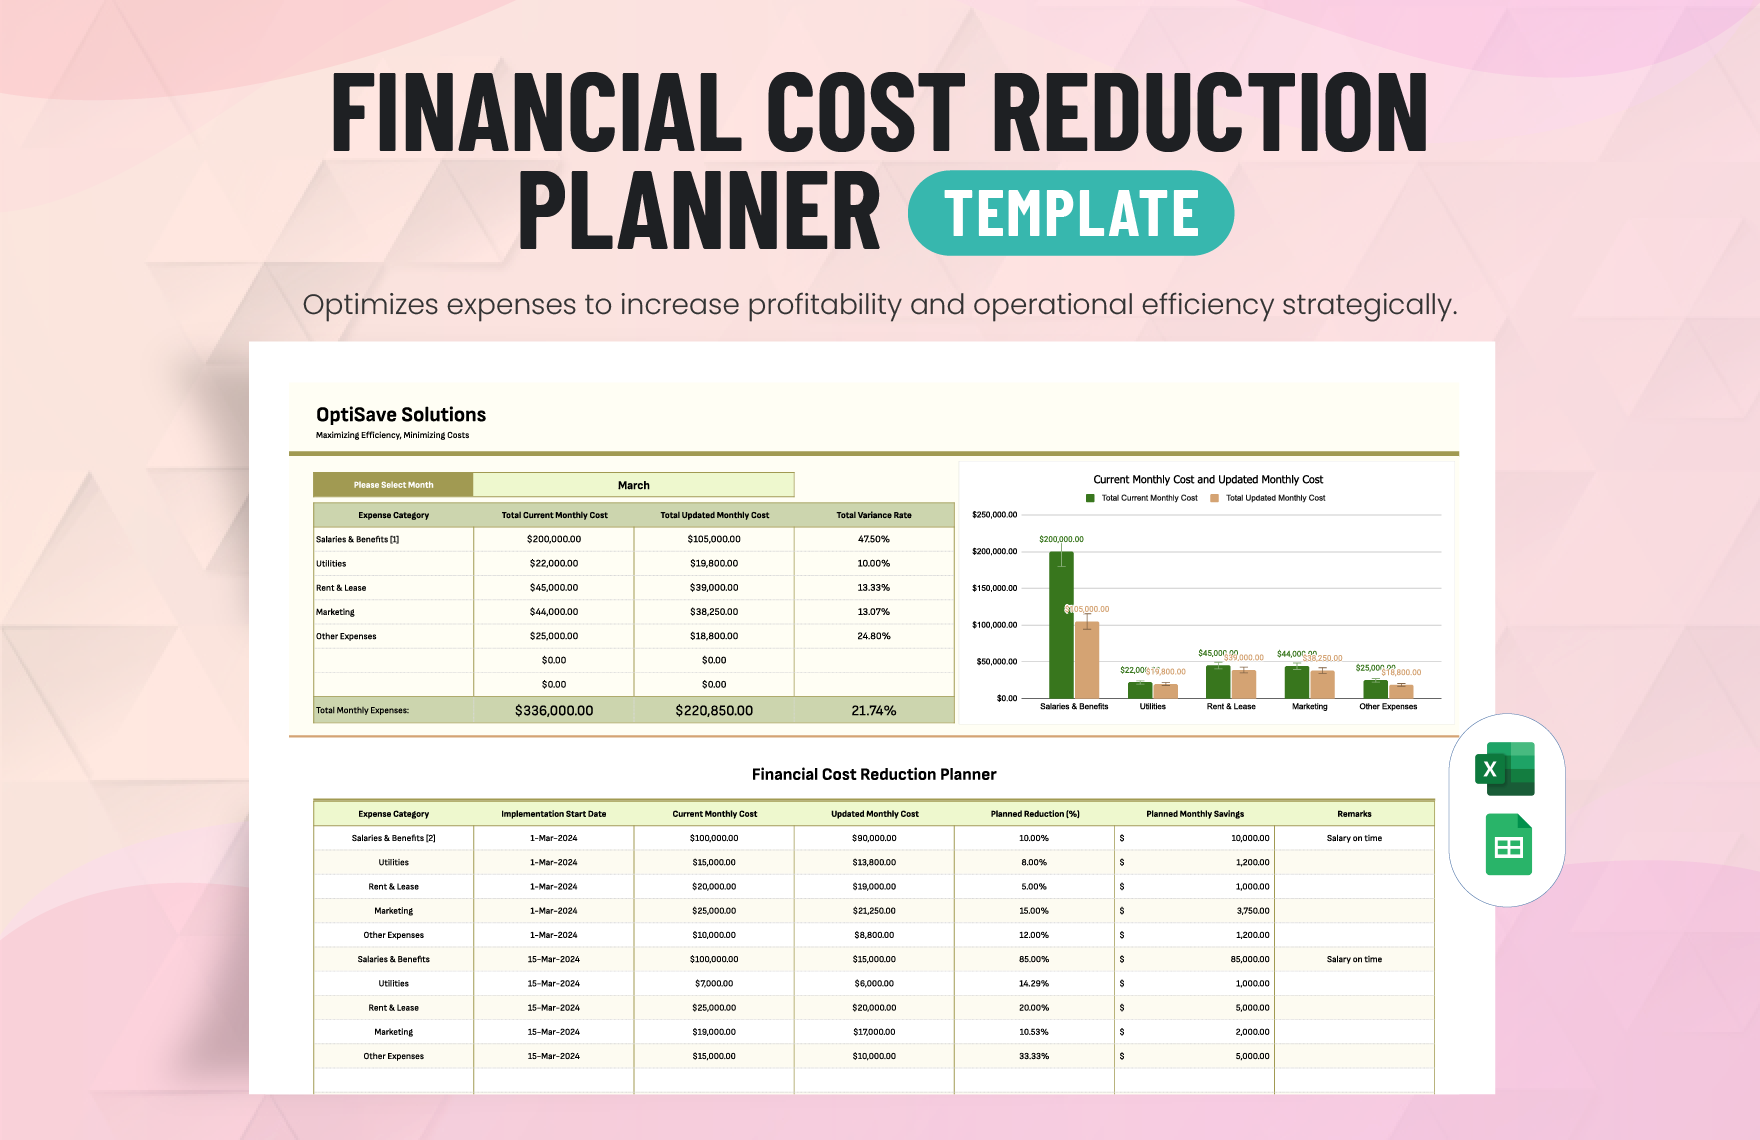 Financial Cost Reduction Planner Template